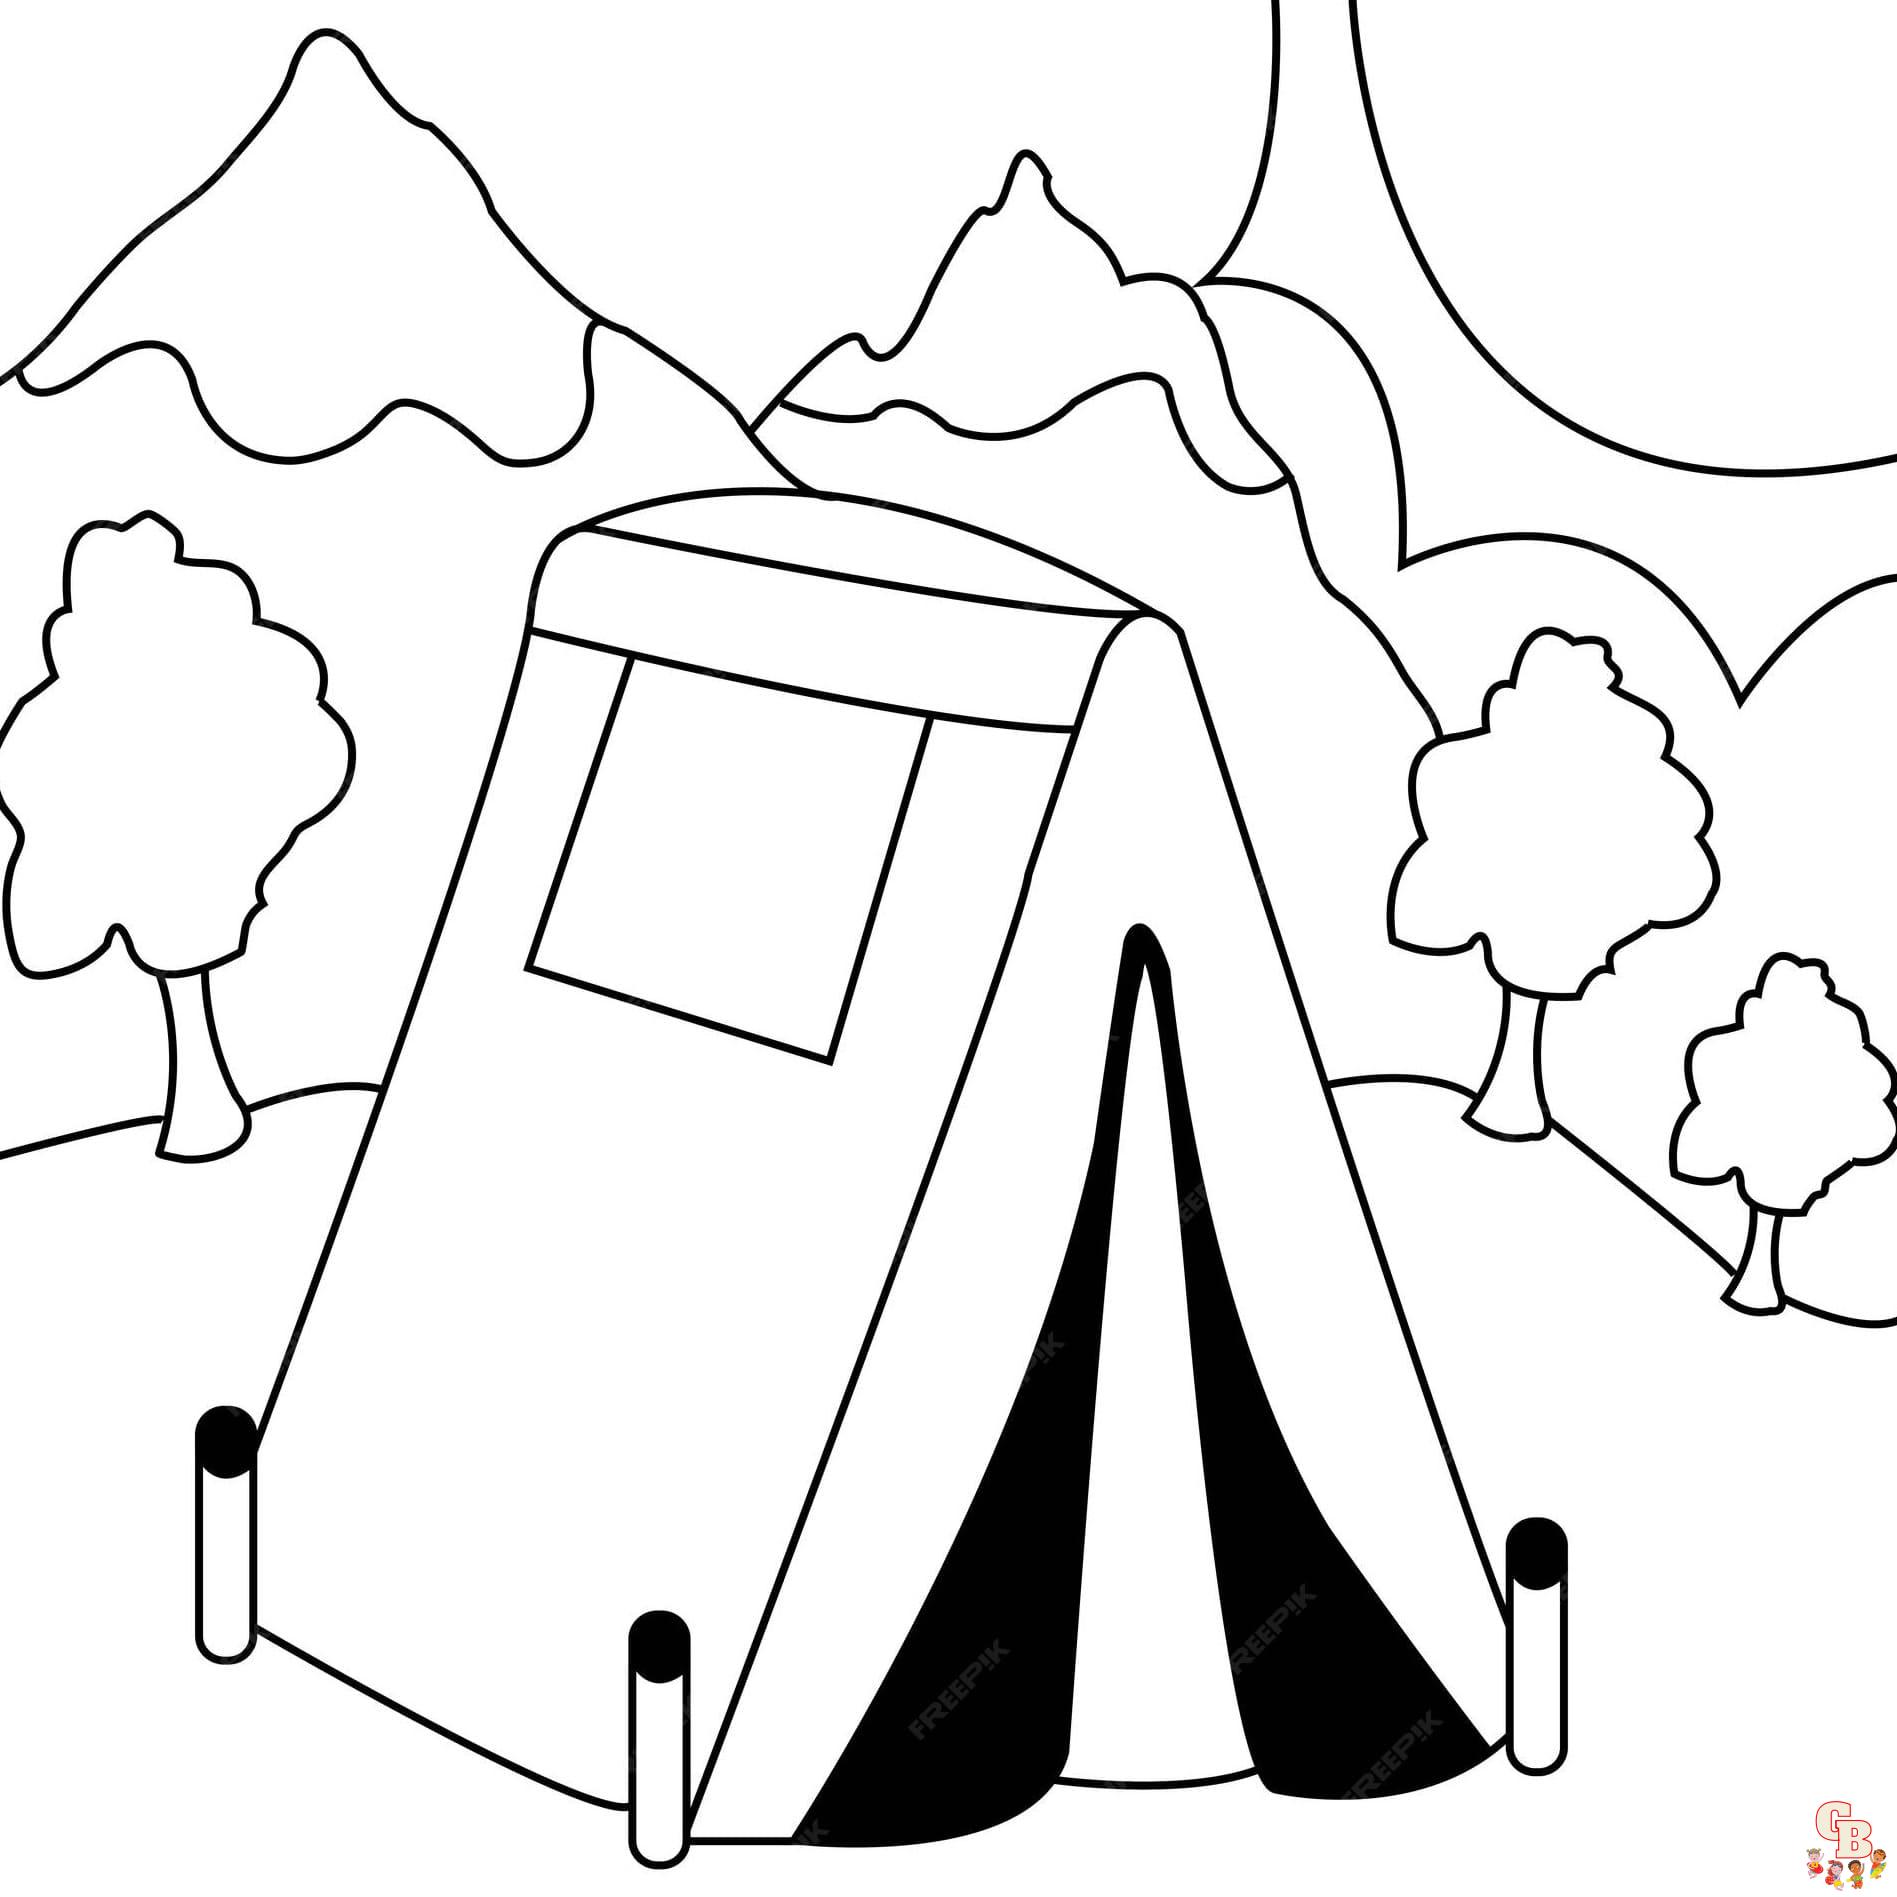 Tent coloring pages free